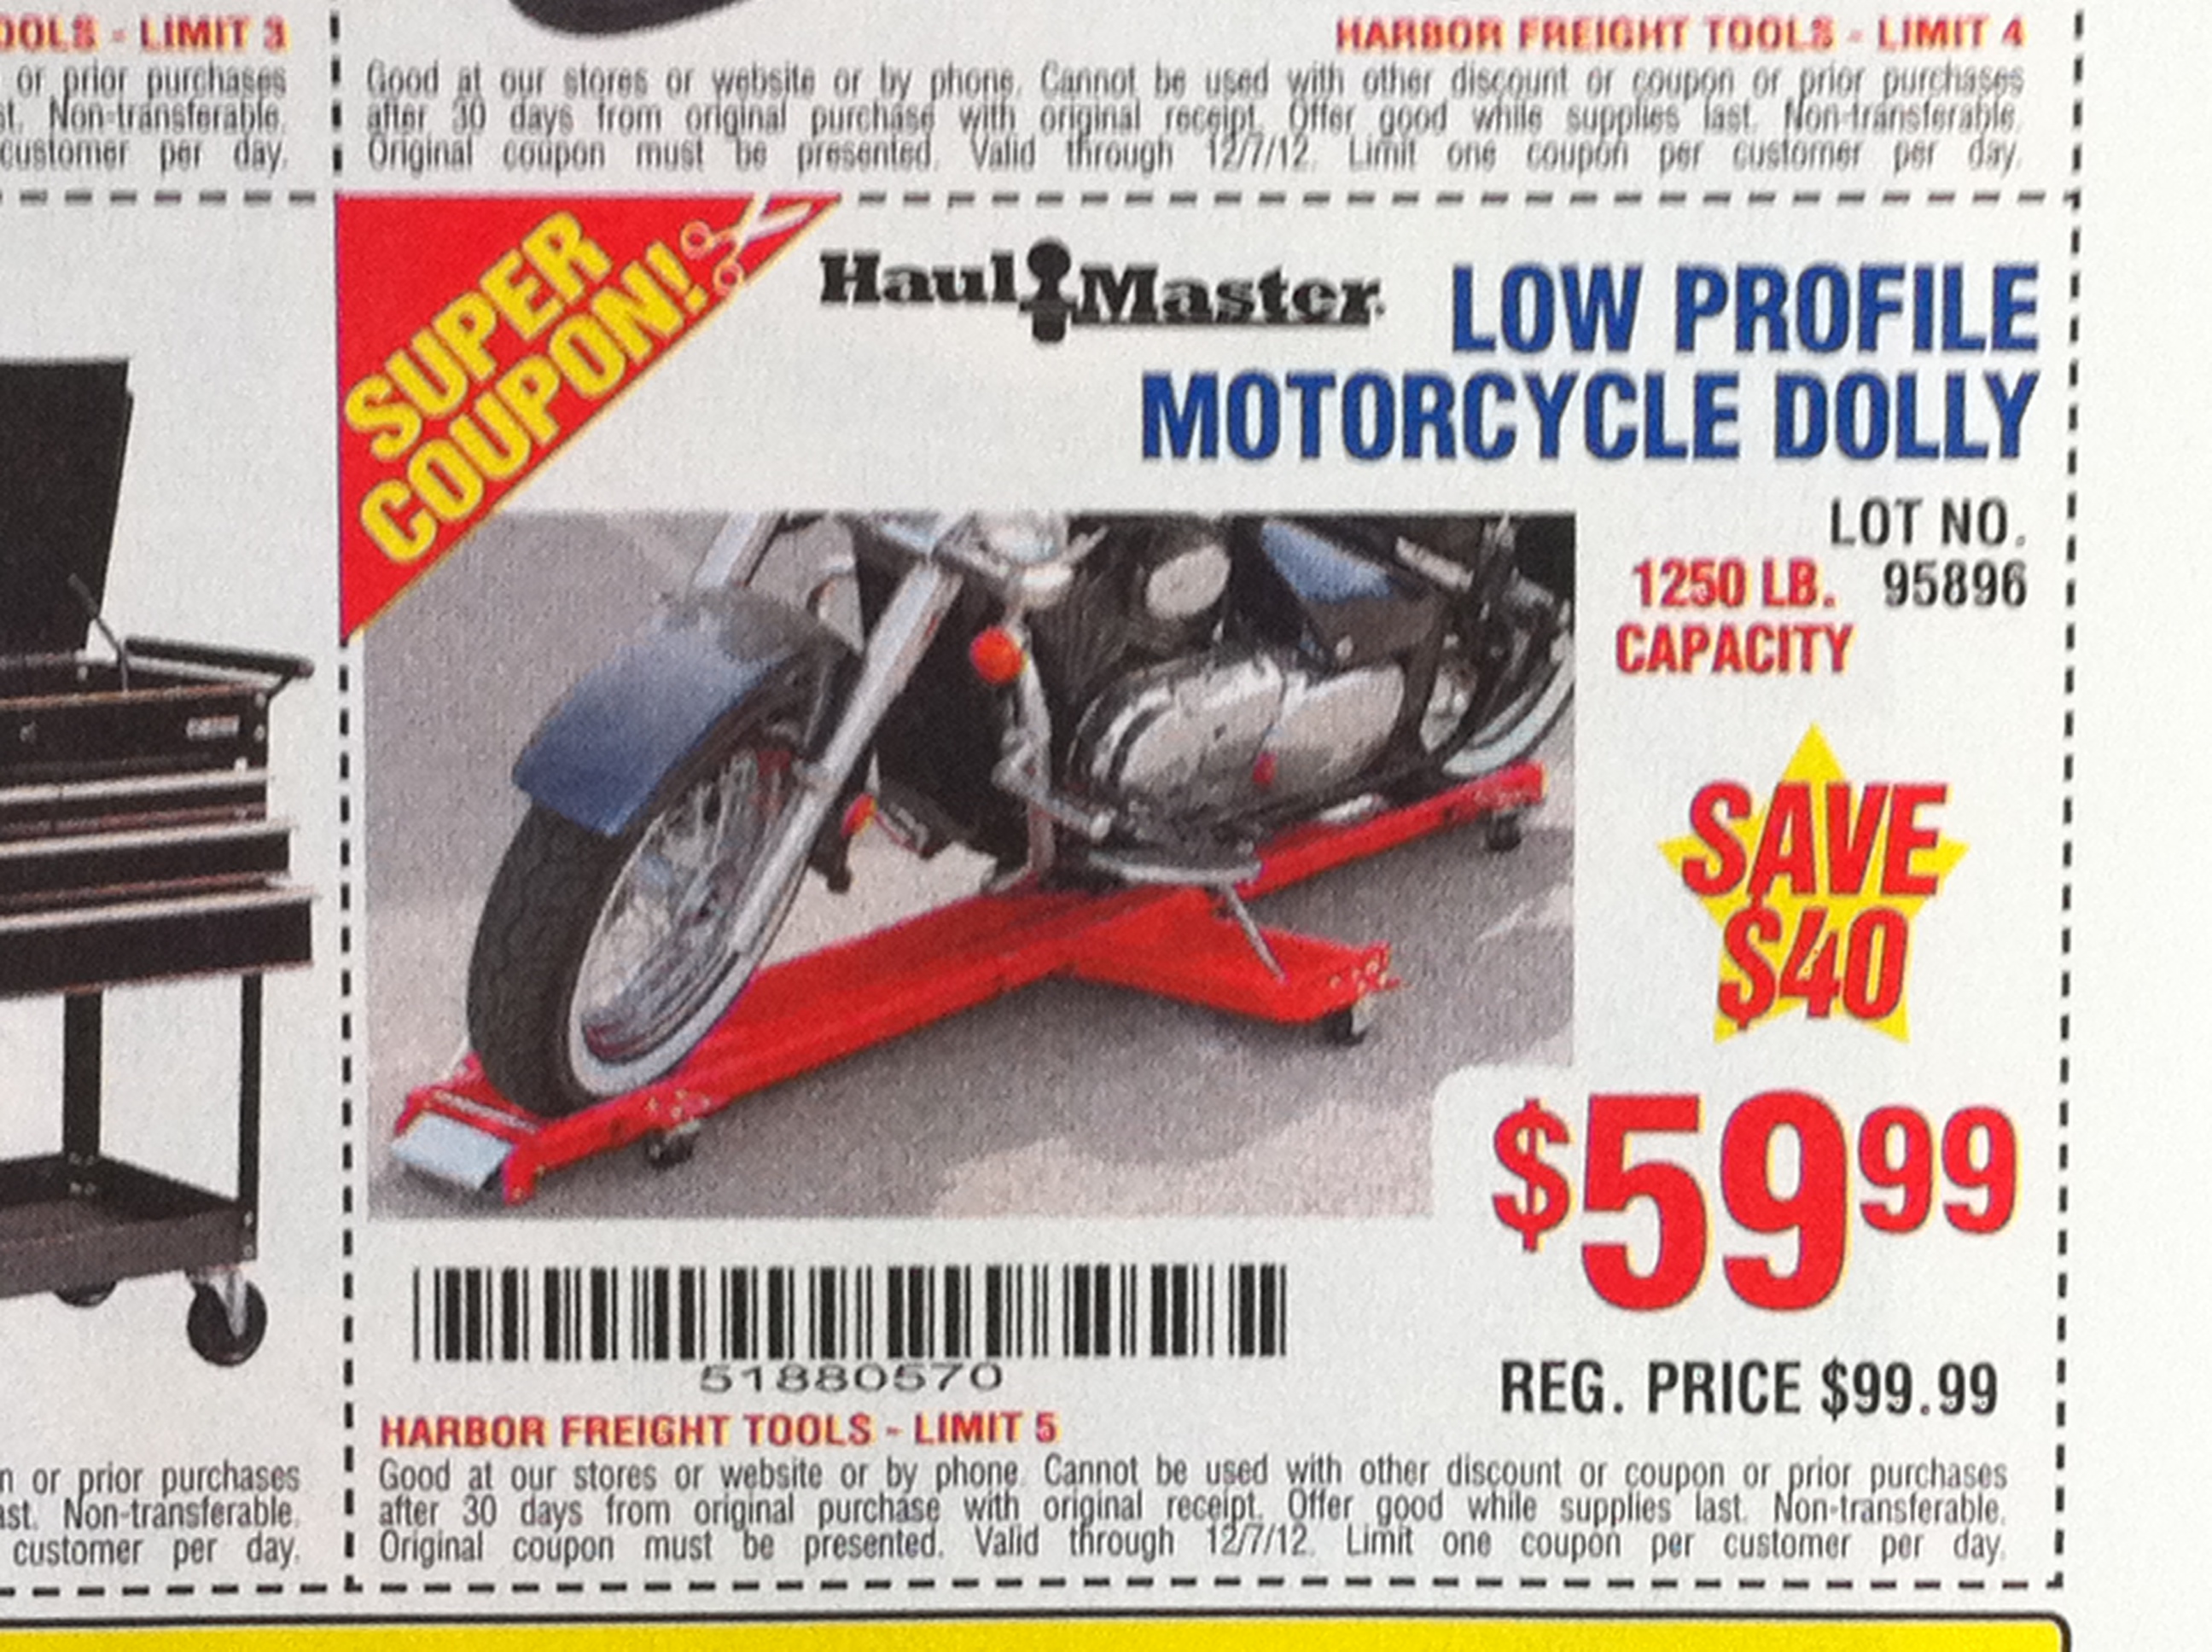 Harbor Freight Coupon Thread Page 256 Slickdeals Net